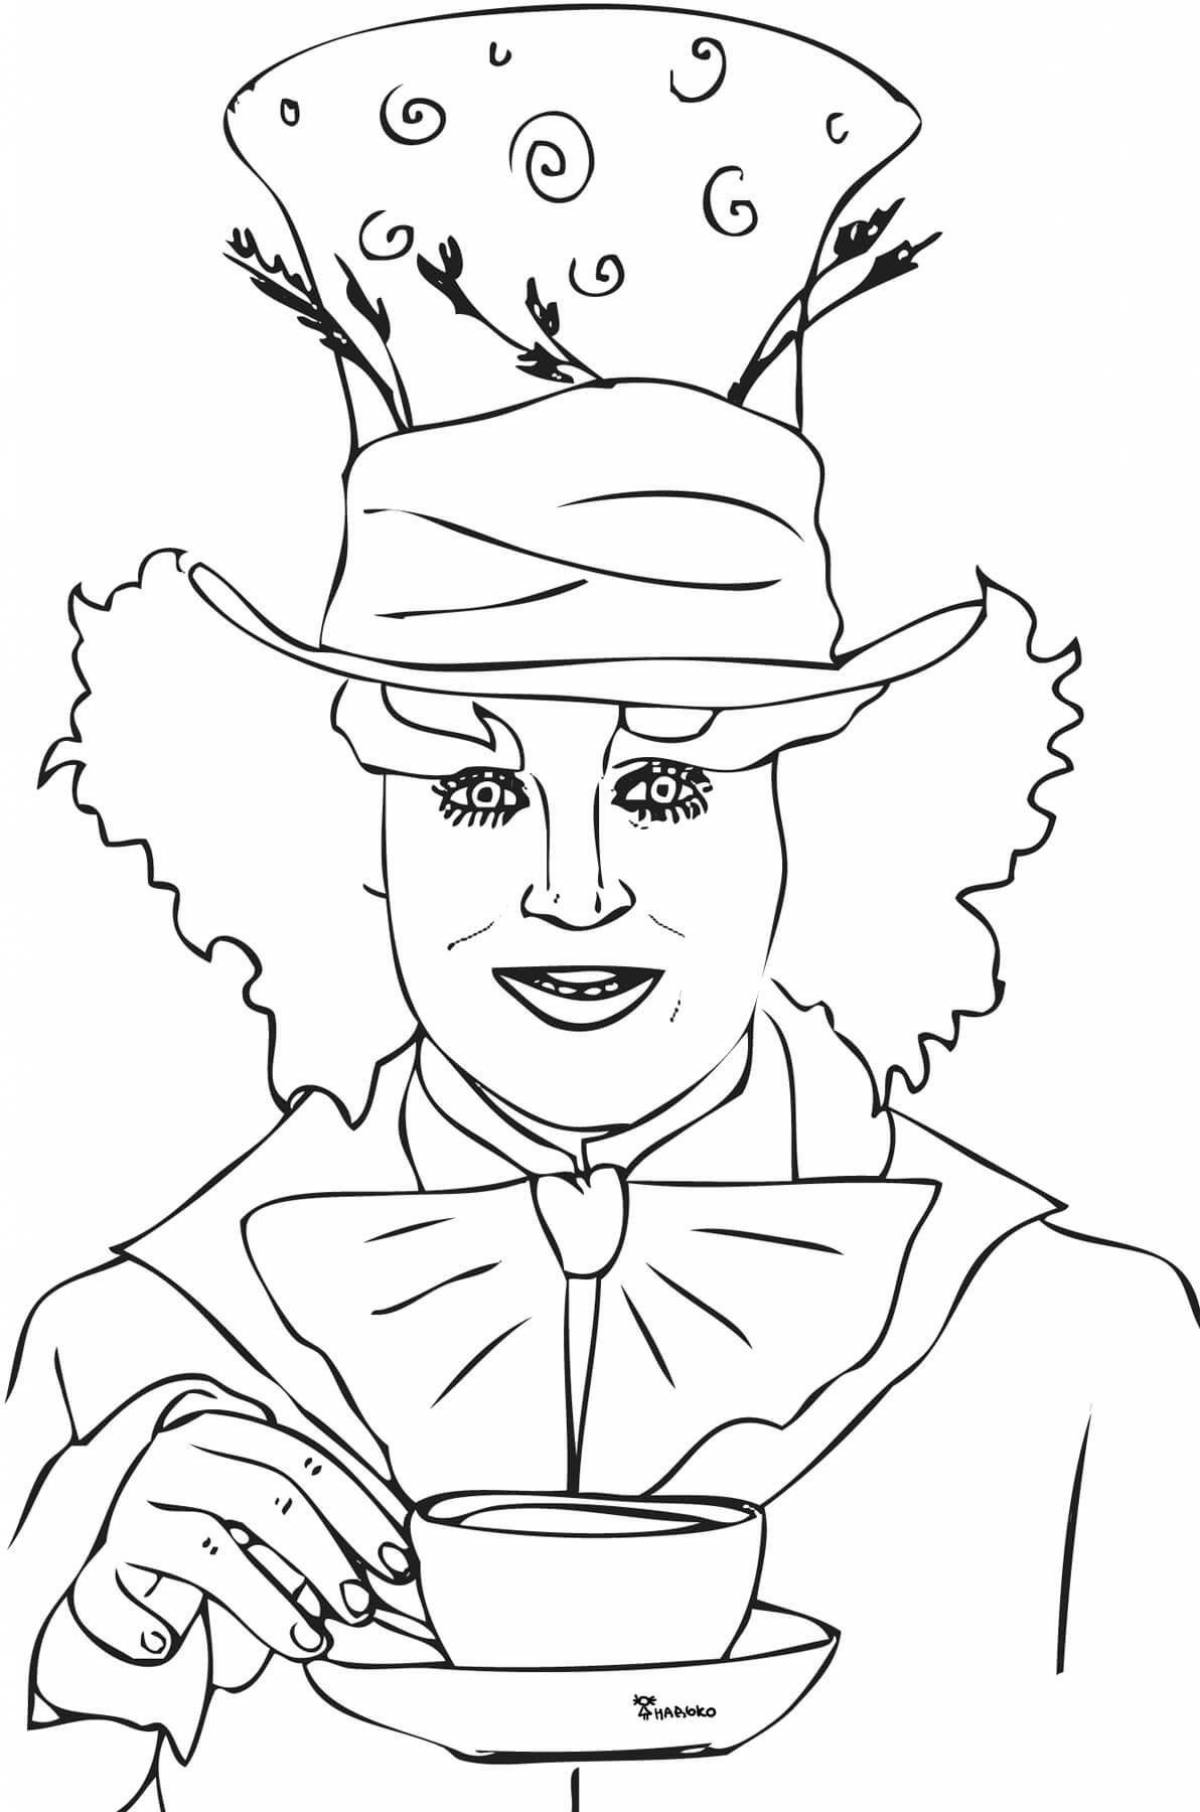 Coloring page the nice hatter